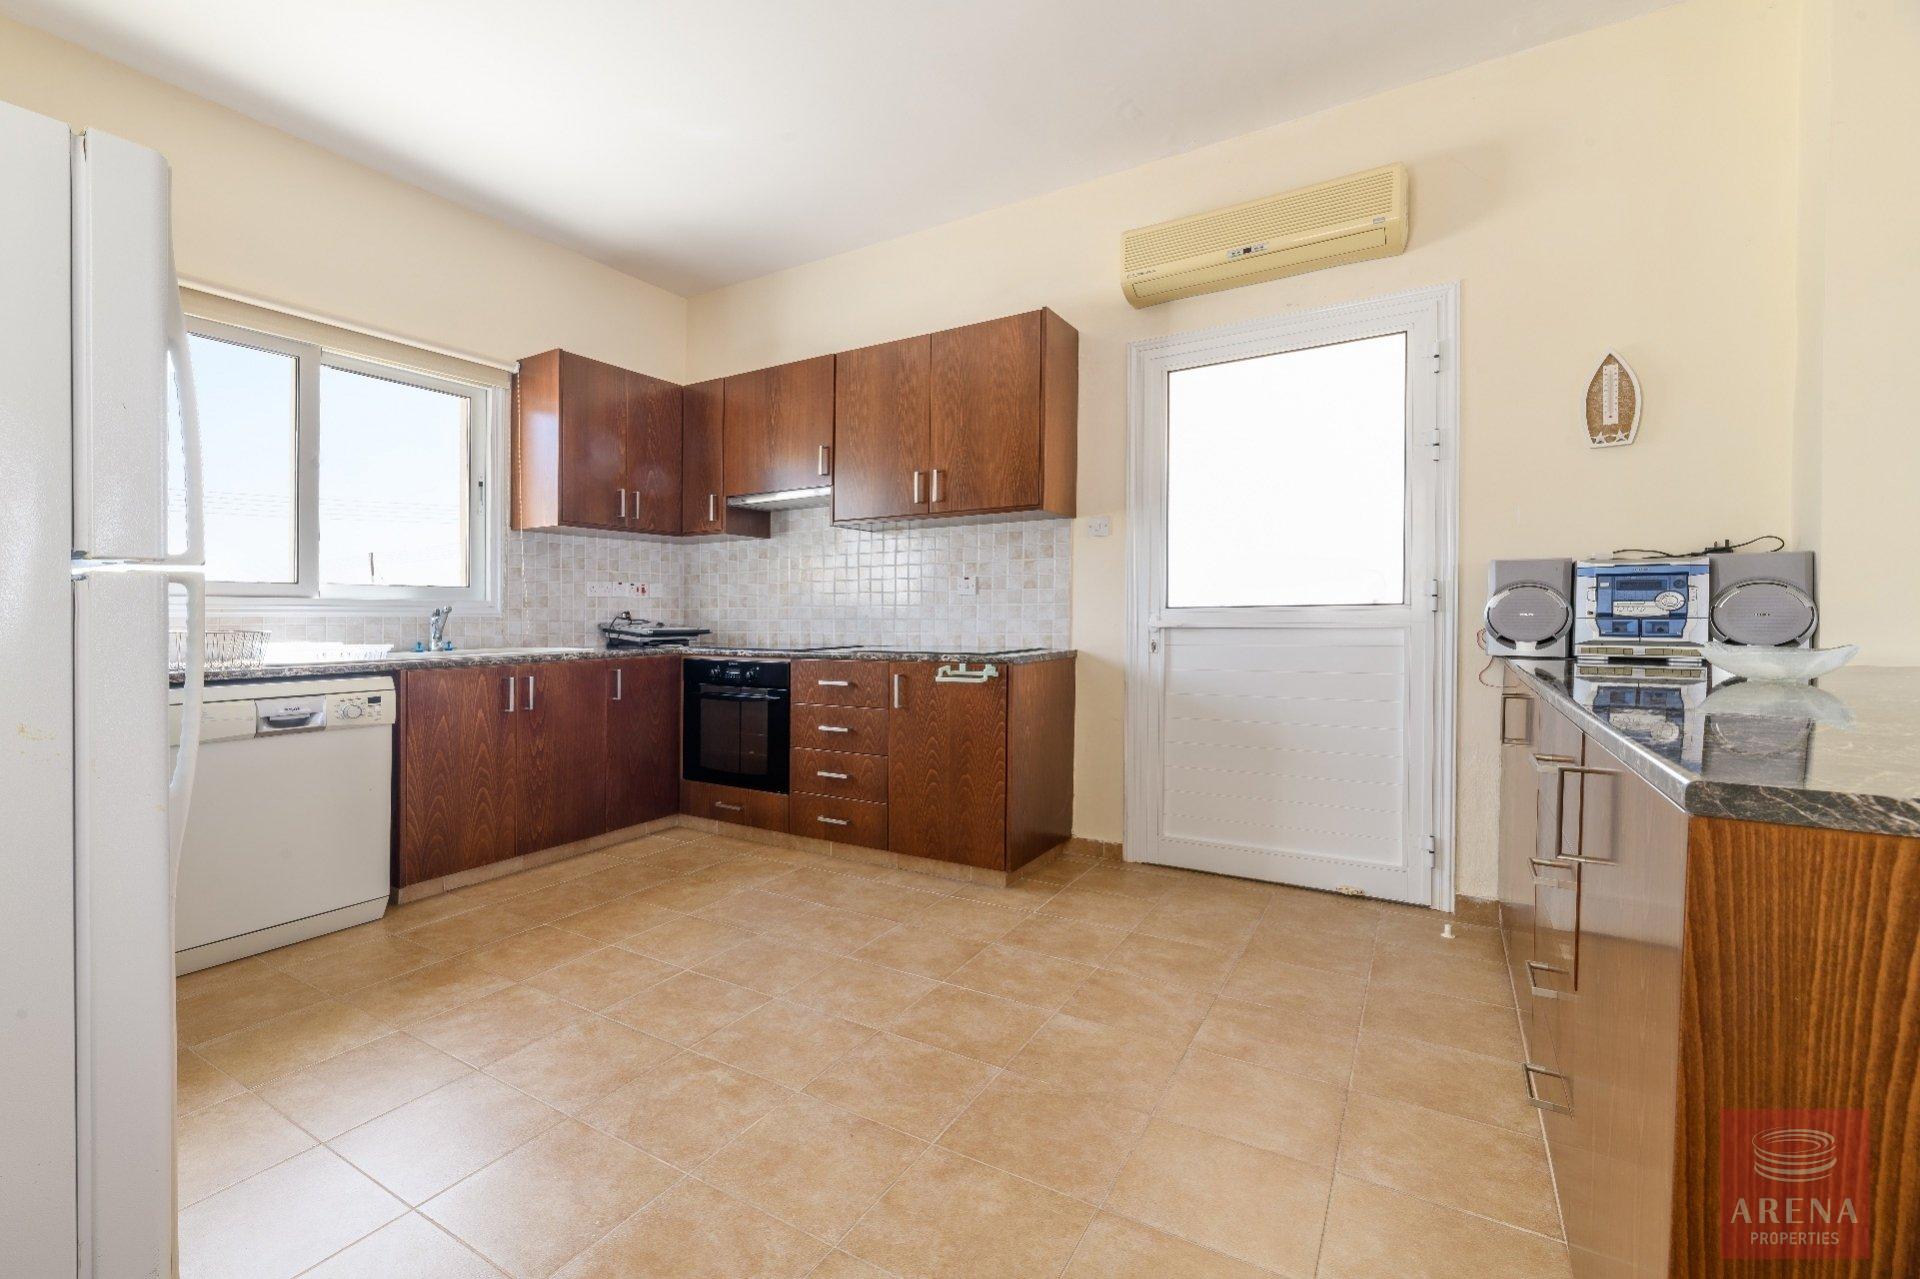 semi-detached house in paralimni - kitchen